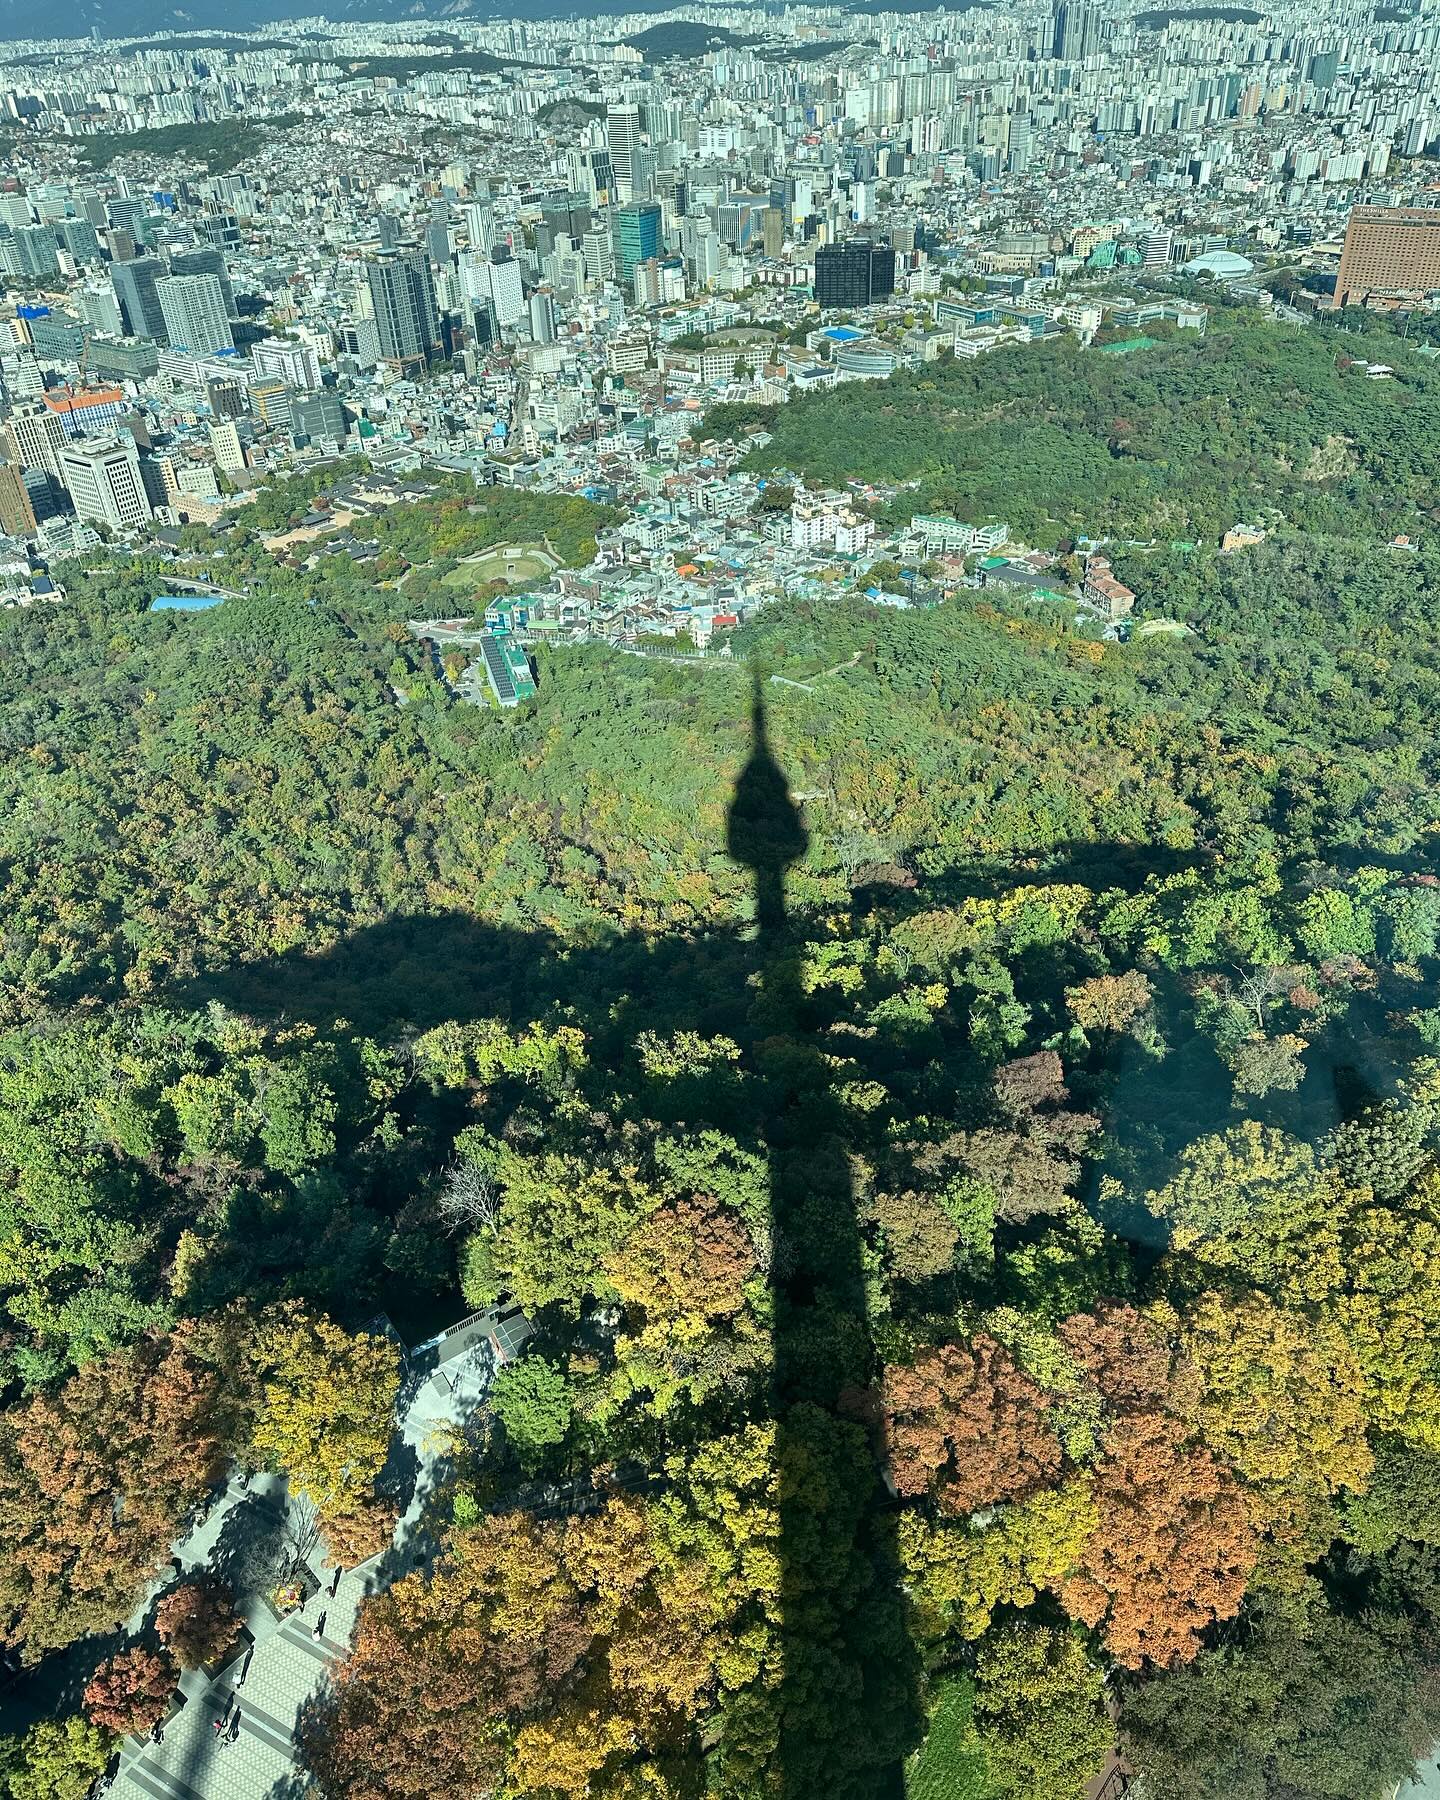 View of Seoul from the top of N Seoul Tower, vertical photos